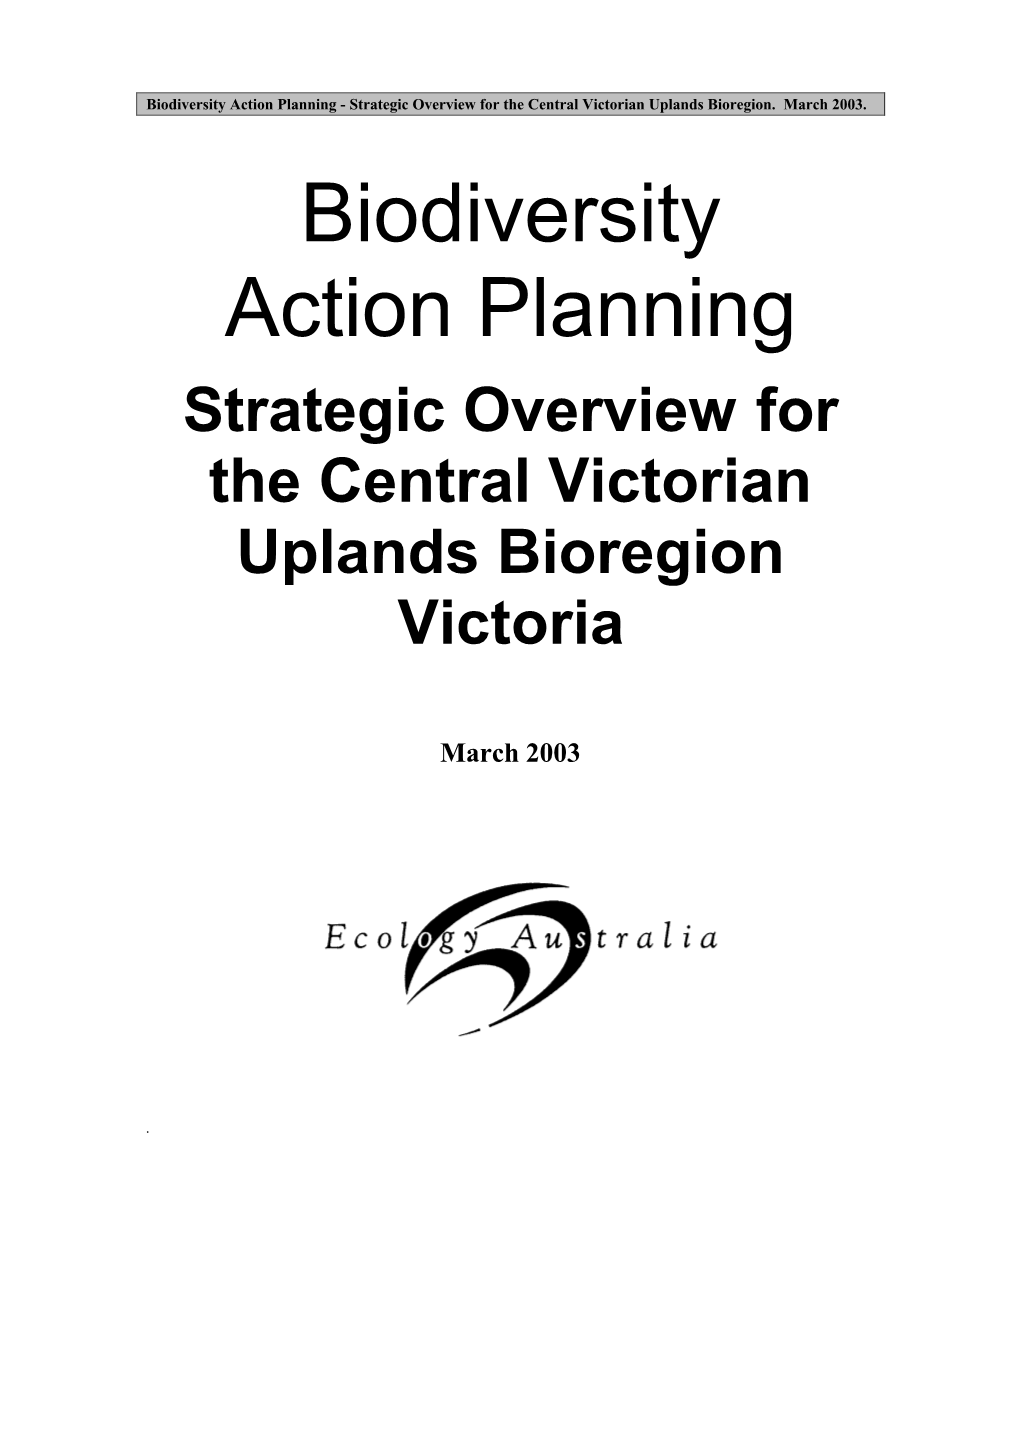 Biodiversity Action Planning: Strategic Overview for the Central Victorian